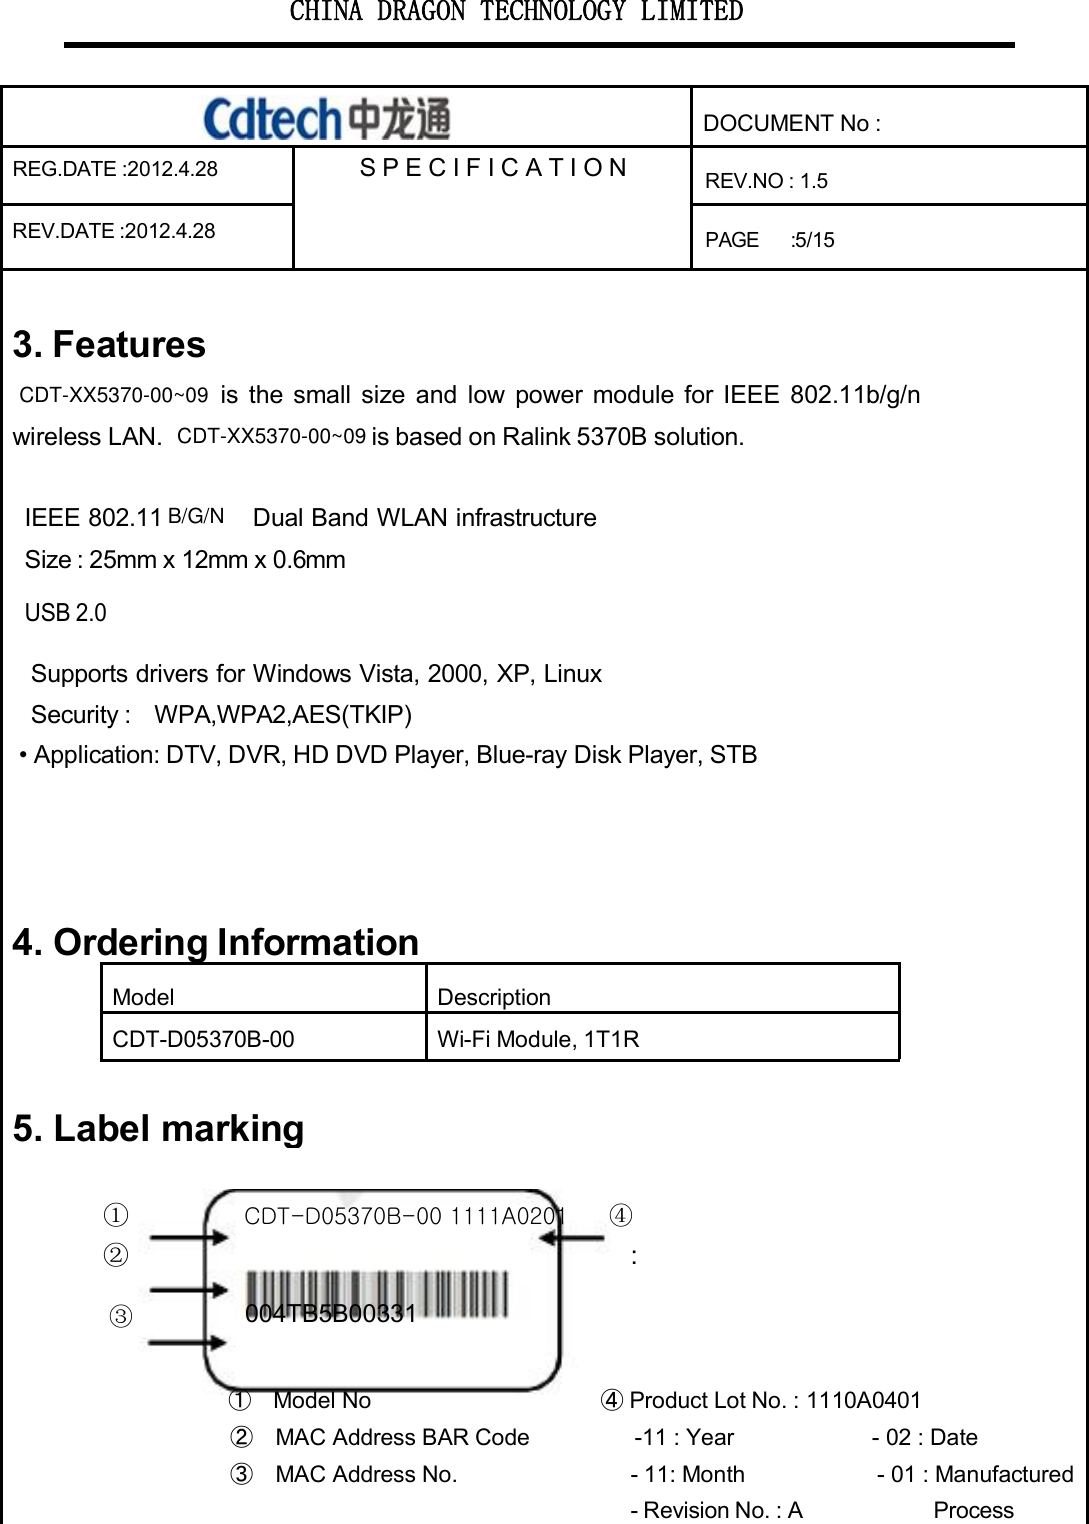 CHINA DRAGON TECHNOLOGY LIMITEDDOCUMENT No :REG.DATE :2012.4.28 S P E C I F I CAT I O N REV.NO : 1.5REV.DATE :2012.4.28PAGE :5/153. Featuresis the small size and low power module for IEEE 802.11b/g/nwireless LAN. is based on Ralink 5370B solution.IEEE 802.11 Dual Band WLAN infrastructureSize : 25mm x 12mm x 0.6mmUSB 2.0Supports drivers for Windows Vista, 2000, XP, LinuxSecurity : WPA,WPA2,AES(TKIP)• Application: DTV, DVR, HD DVDPlayer,Blue-rayDiskPlayer,STB4.OrderingInformationModelDescriptionCDT-D05370B-00 Wi-Fi Module, 1T1R5. Labelmarking①CDT-D05370B-00 1111A0201④②:③004TB5B00331①Model No ④Product Lot No. : 1110A0401②MAC Address BAR Code -11 : Year - 02 : Date③MAC Address No. - 11: Month - 01 : Manufactured- Revision No. : A ProcessCDT-XX5370-00~09CDT-XX5370-00~09B/G/N